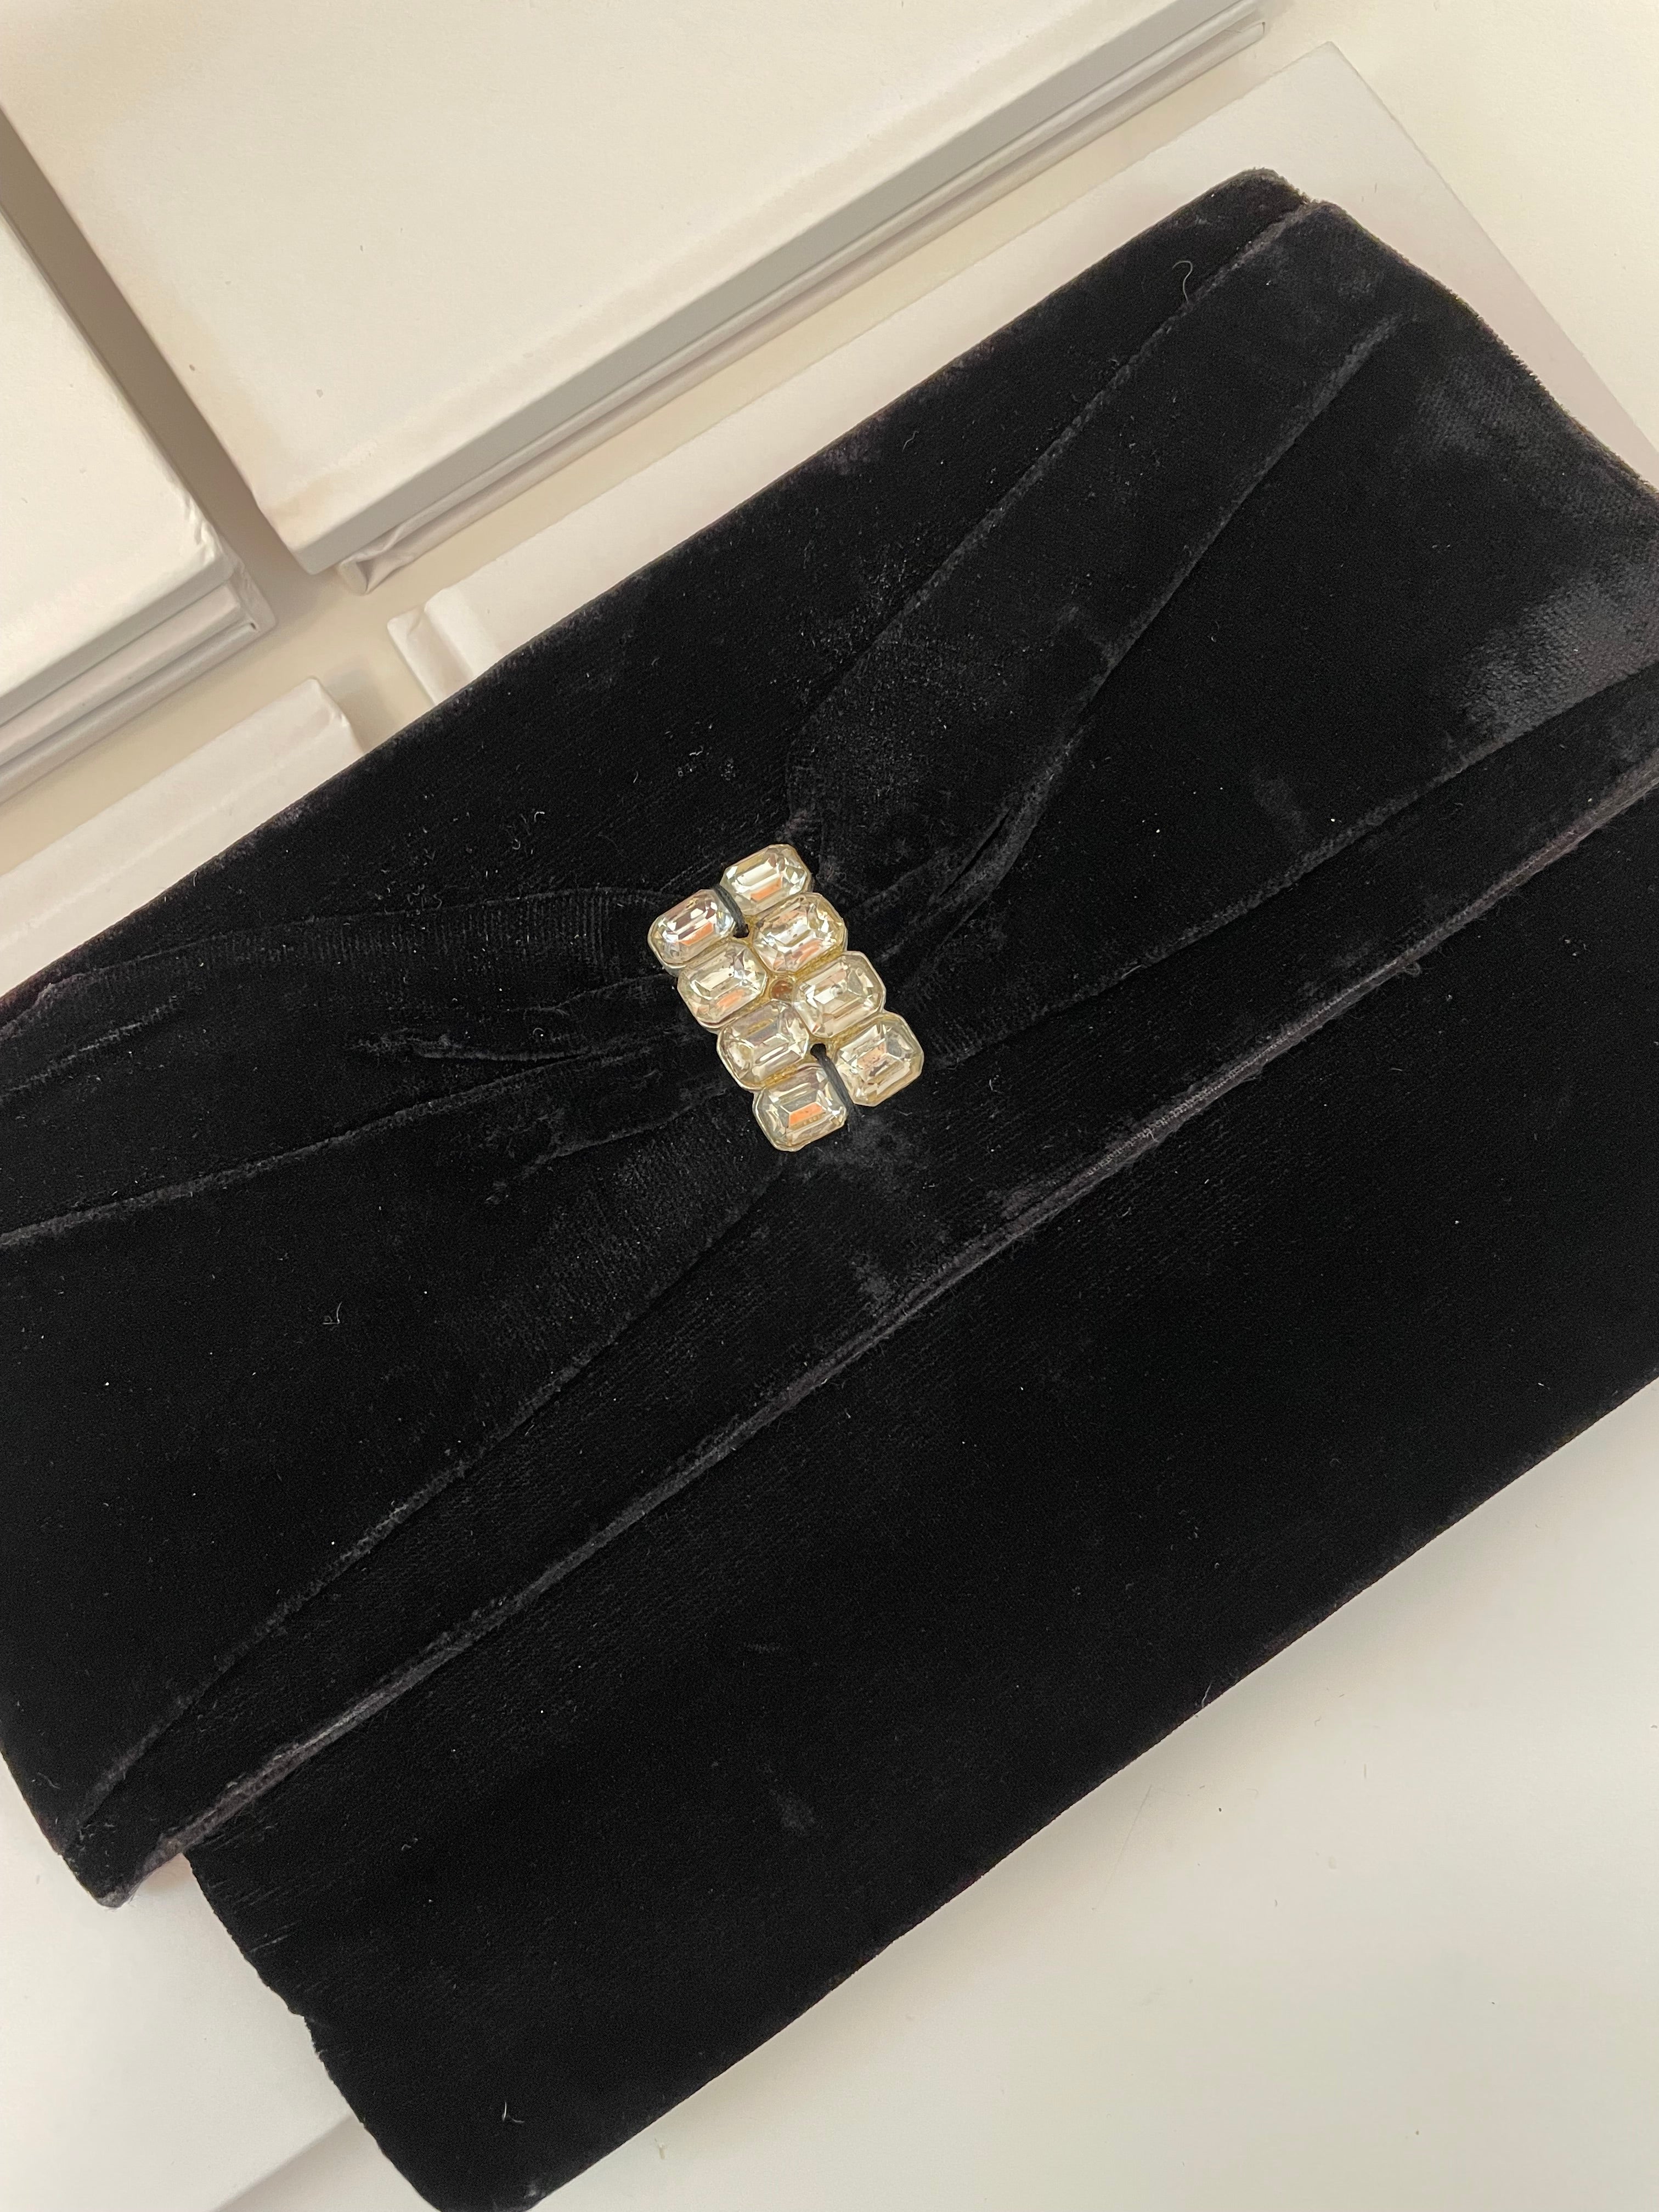 The Socialite and her love of a gem studded velvet clutch bag... 1950's chic